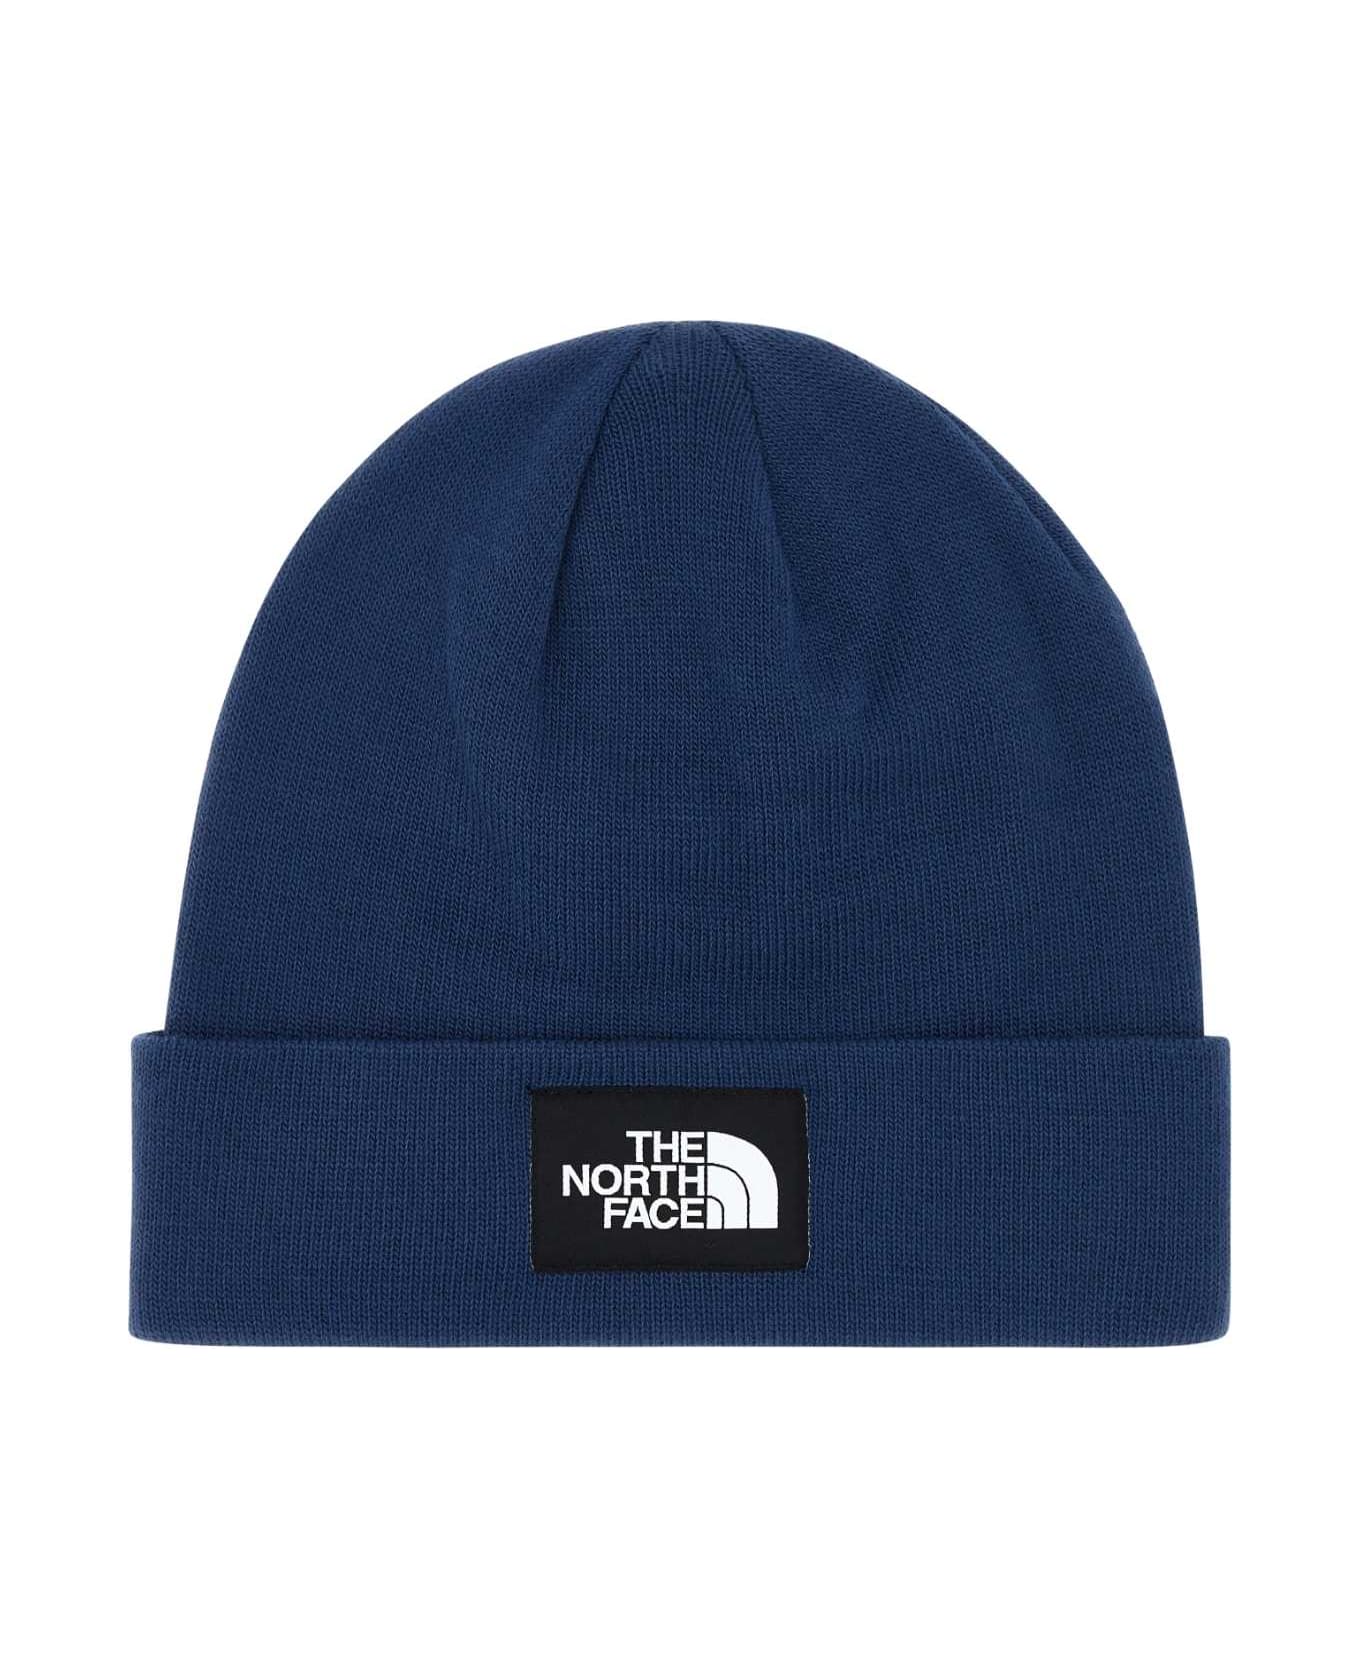 The North Face Navy Blue Stretch Polyester Blend Beanie Hat - SHADY BLUE デジタルアクセサリー